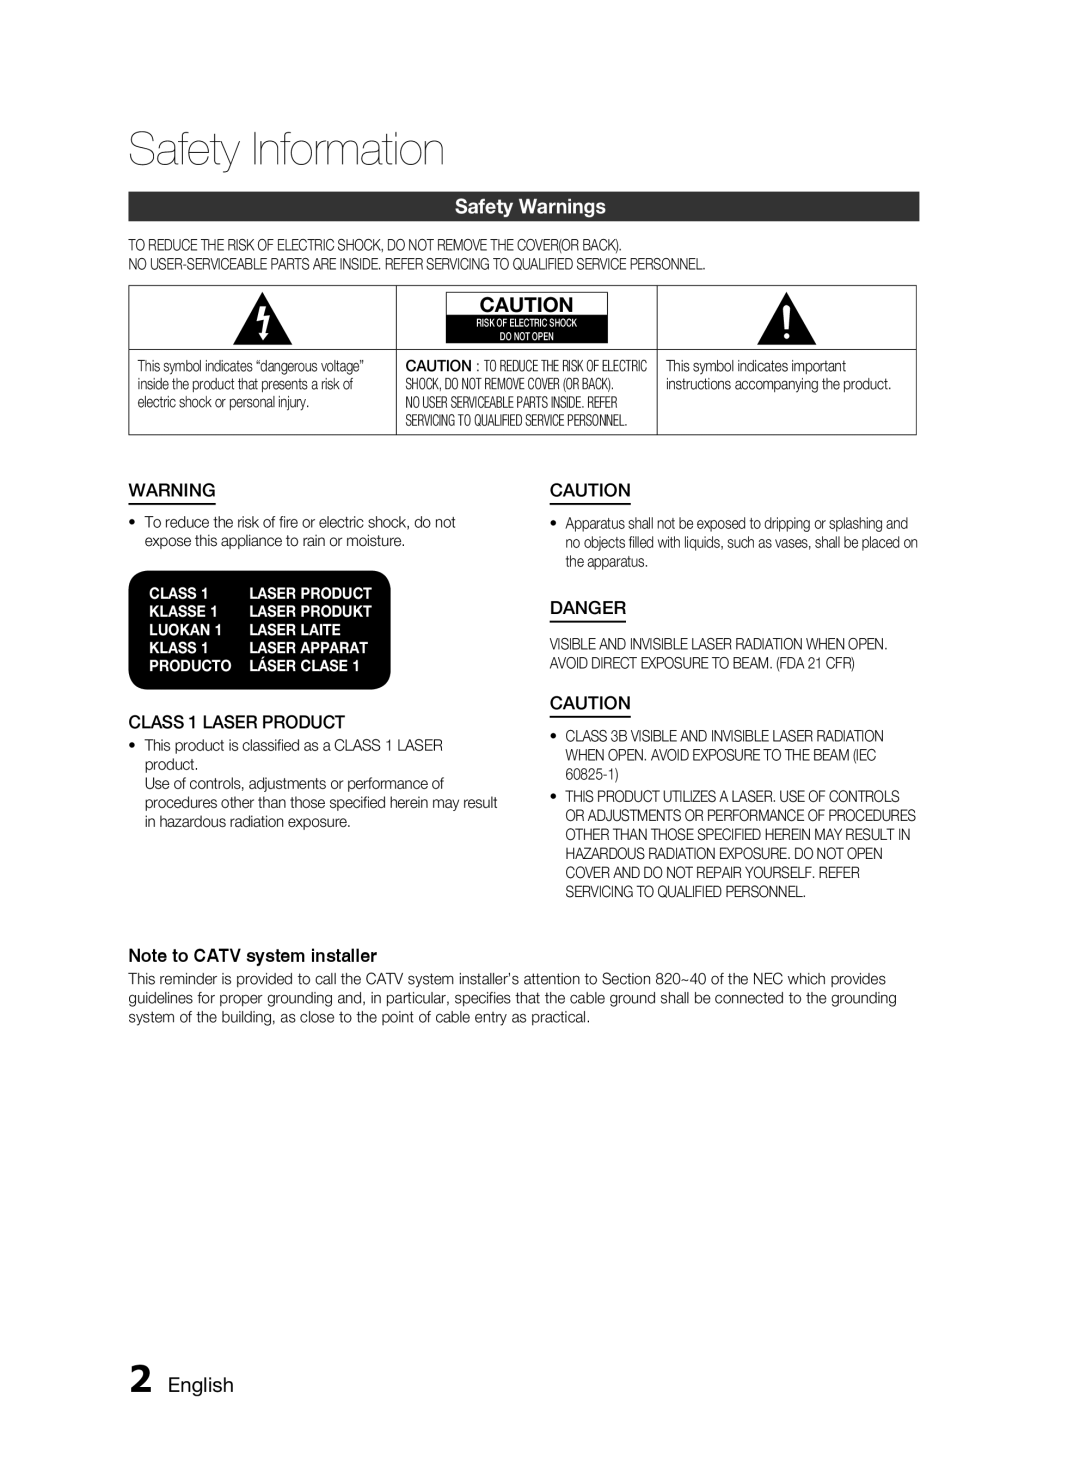 Samsung AH68-02255S Safety Information, Safety Warnings, English, Note to CATV system installer, Class, Klasse, Luokan 